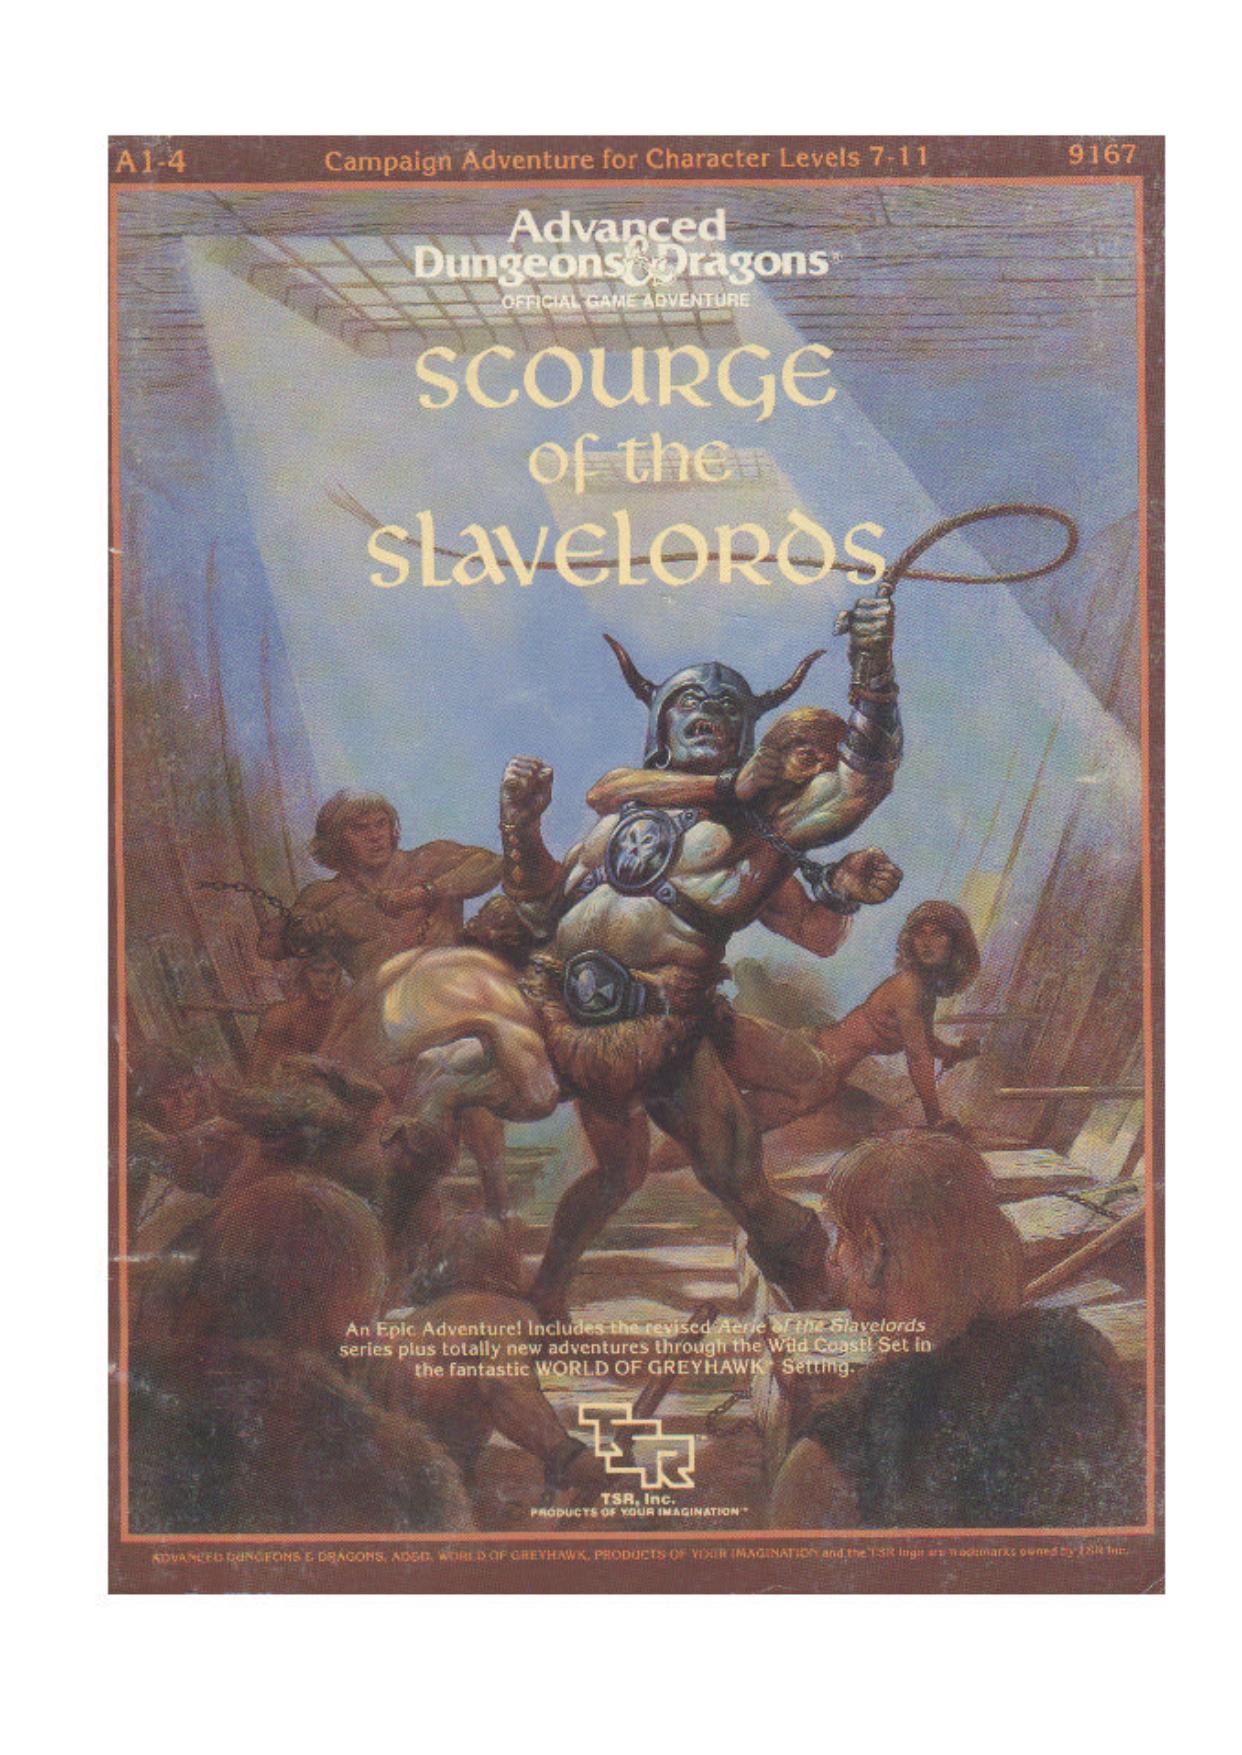 Scourge of the Slavelords